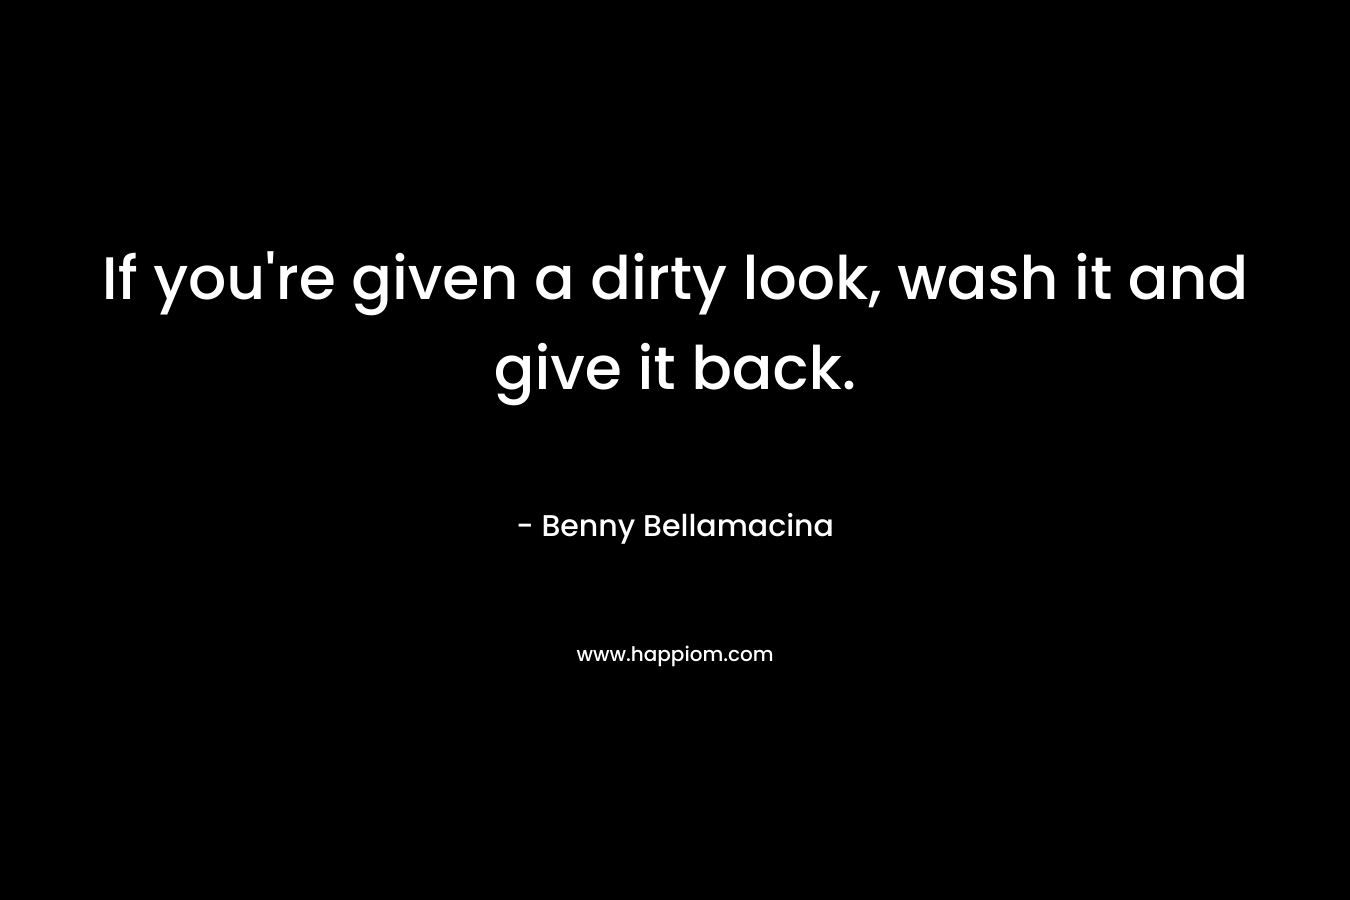 If you’re given a dirty look, wash it and give it back. – Benny Bellamacina